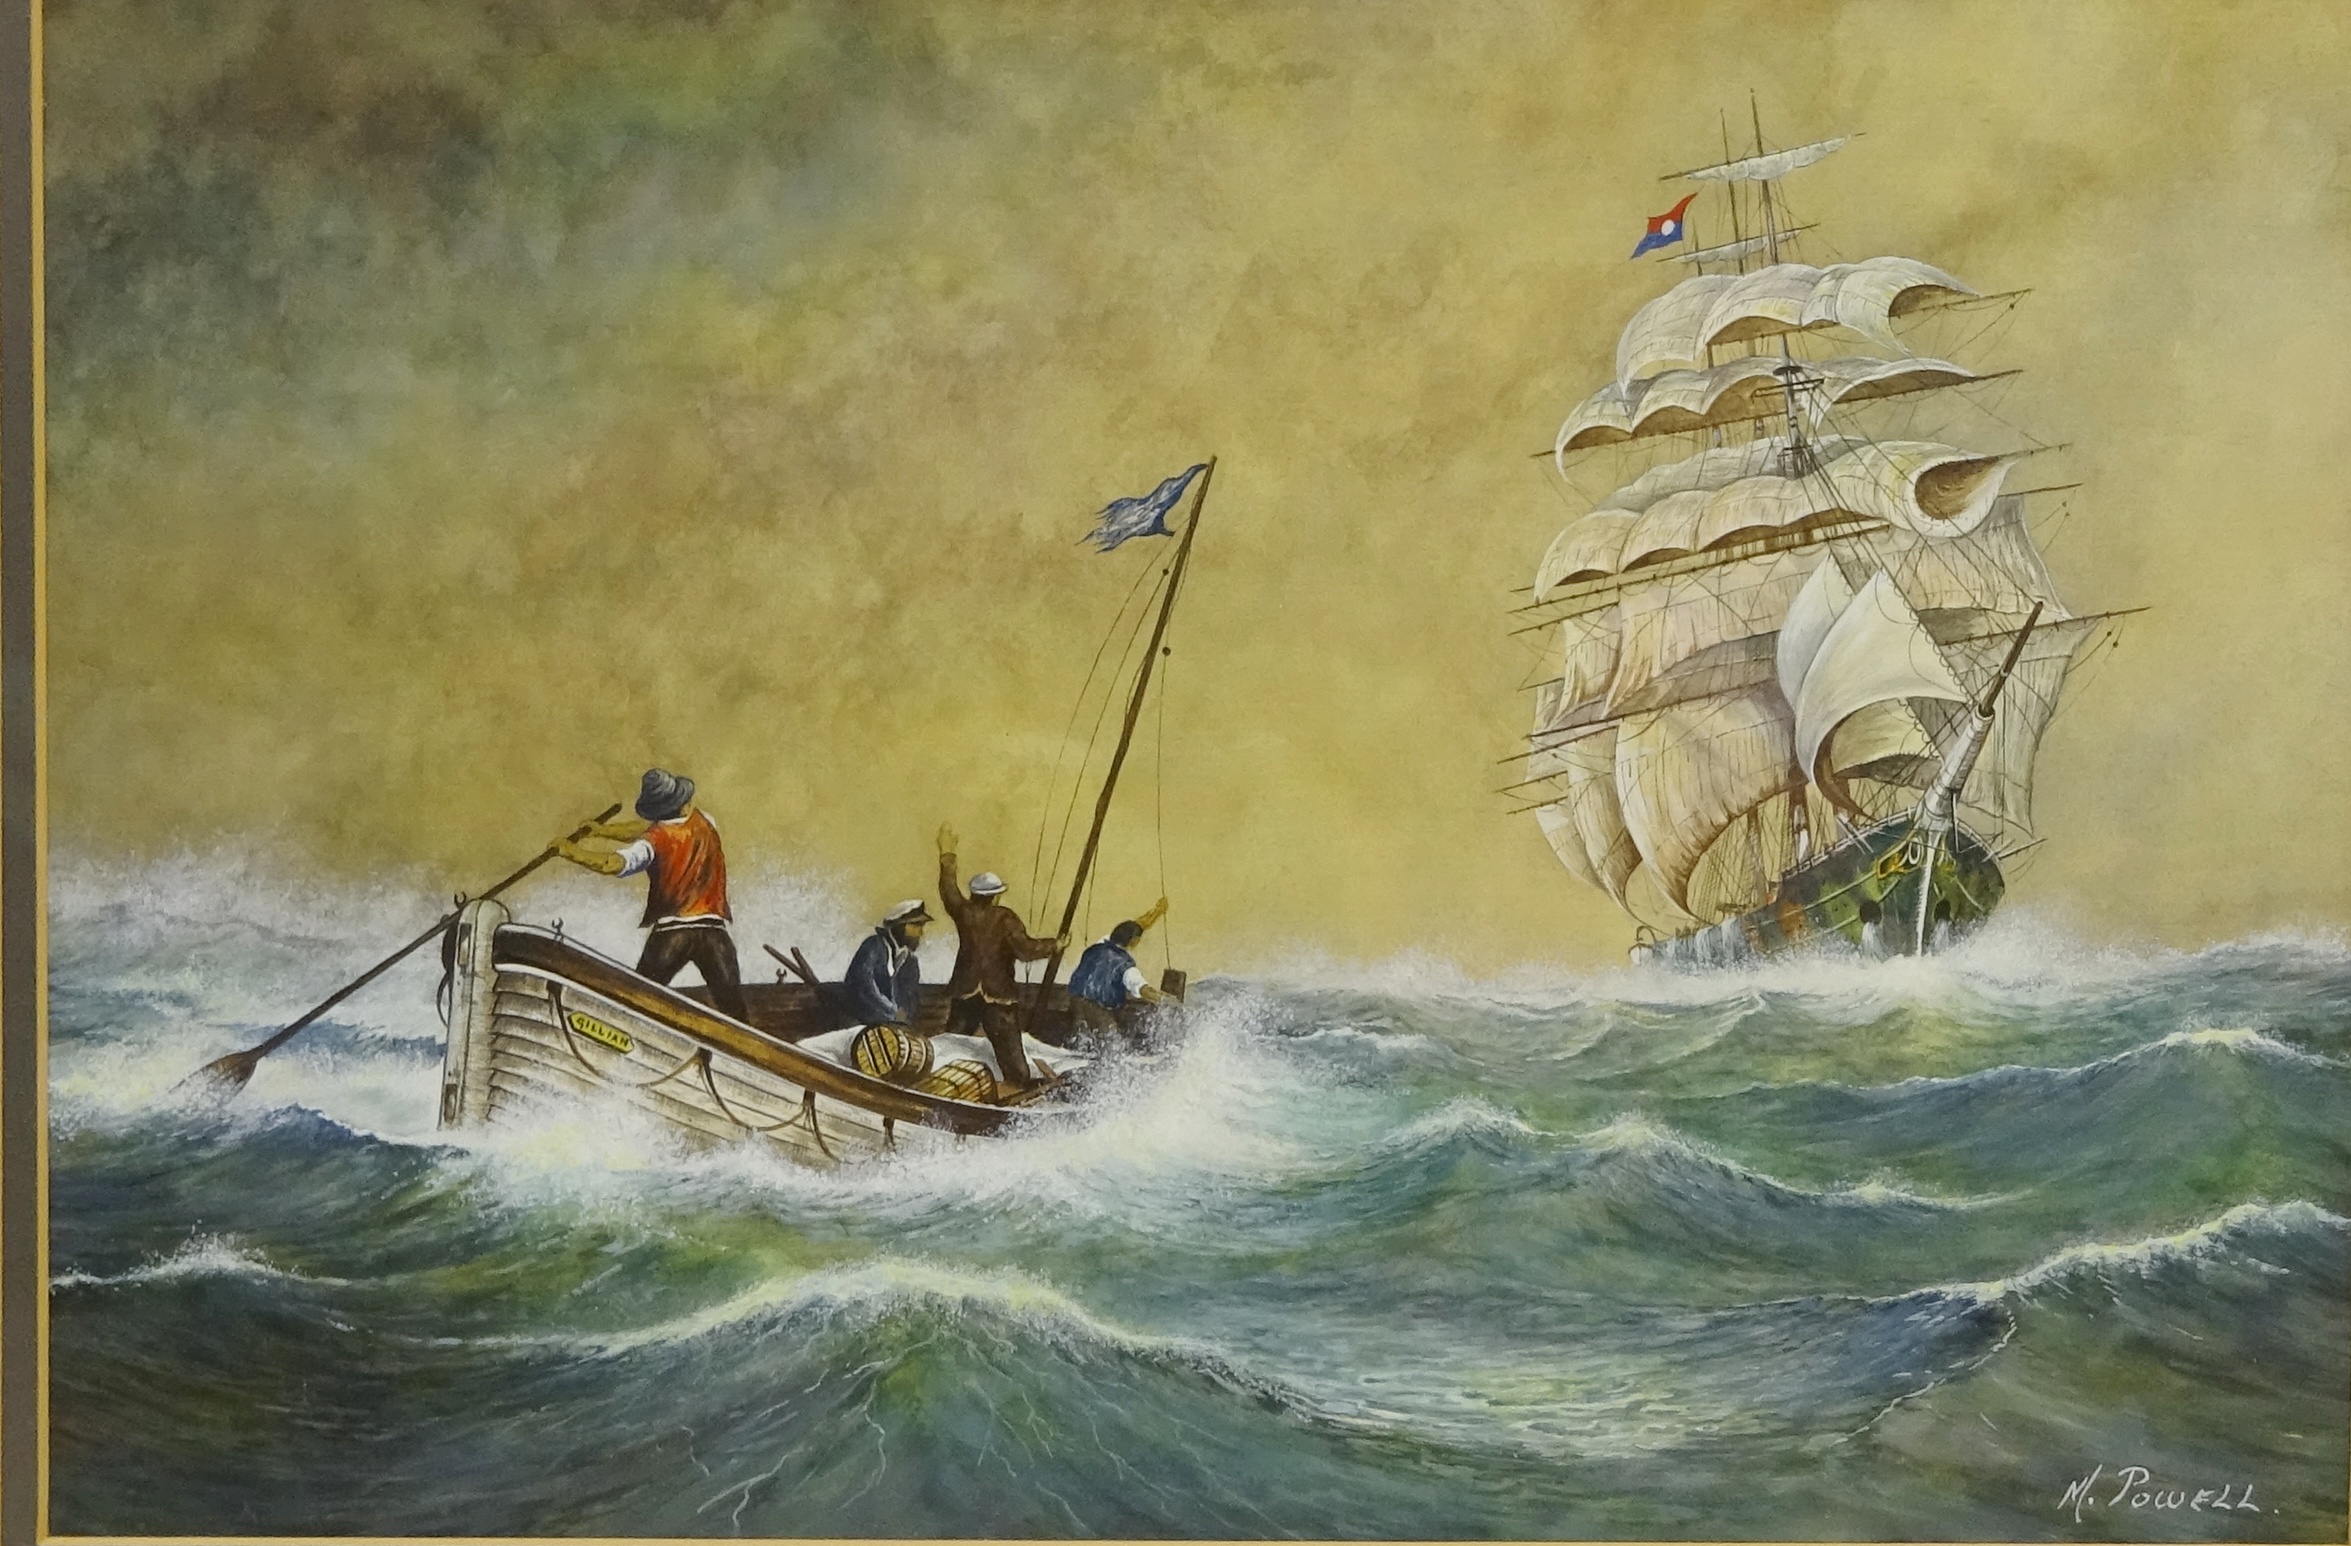 Michael Powell (British 20th century): 'The Rescue' - Boats in Stormy Seas,